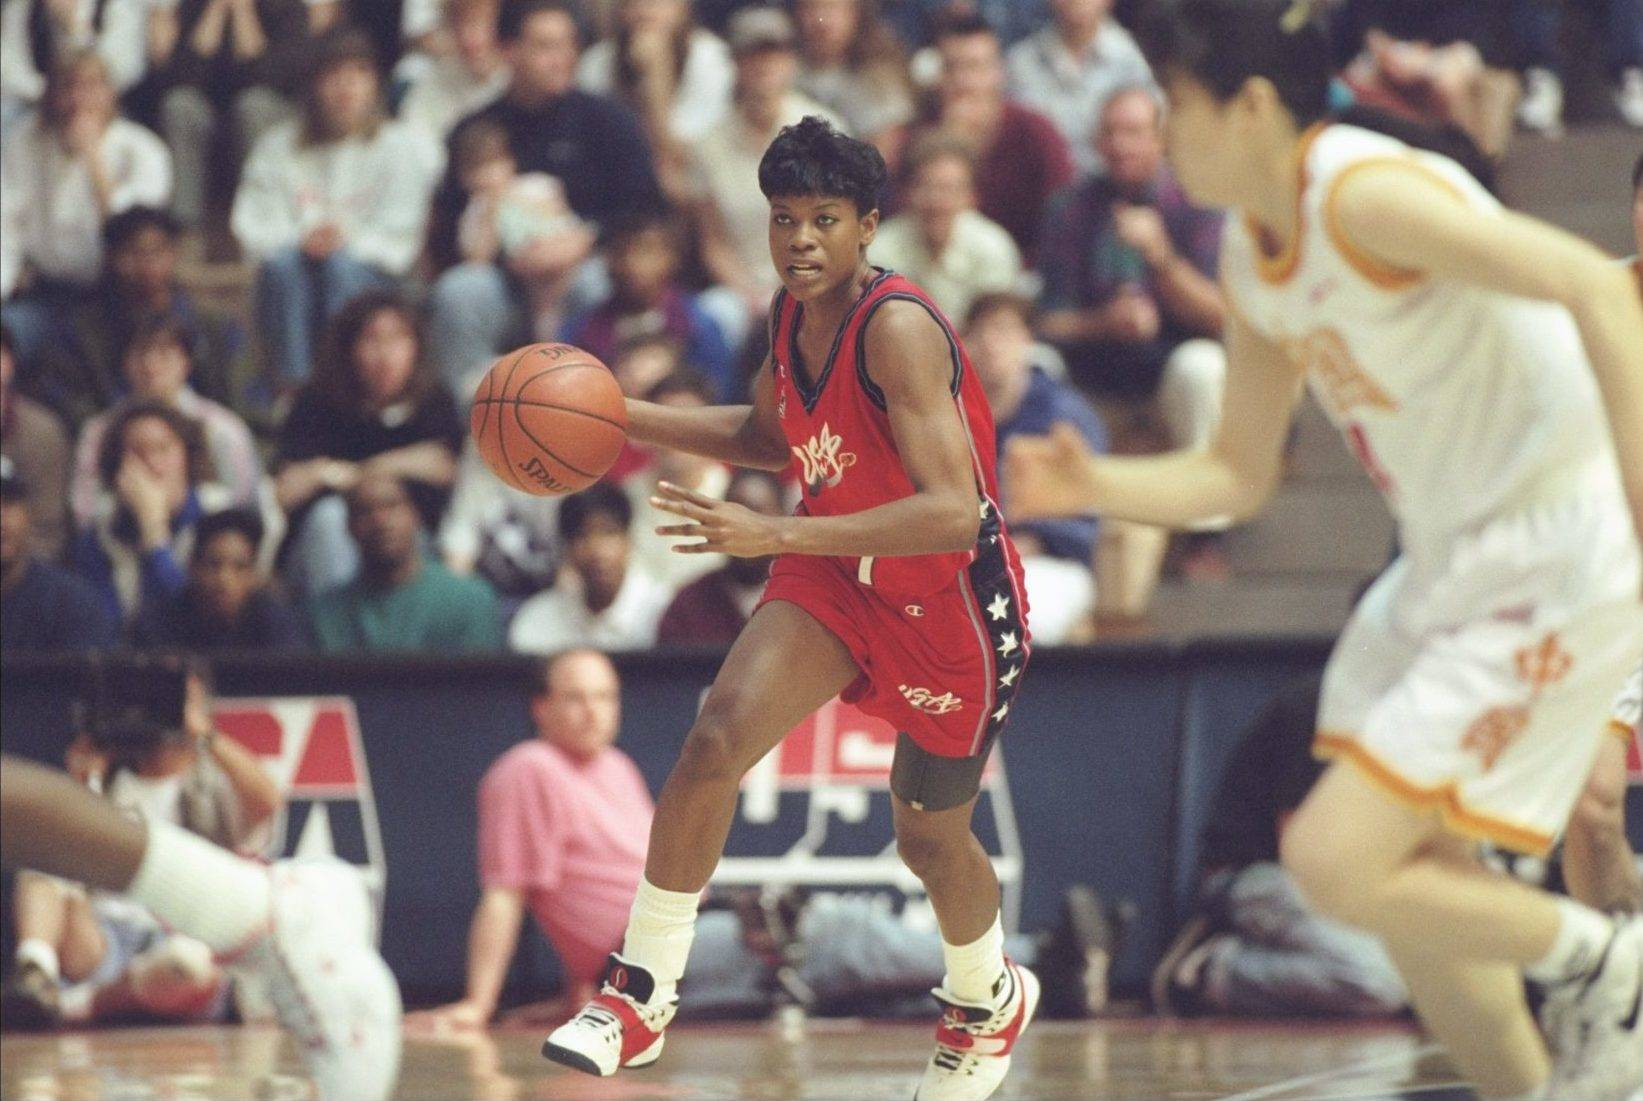 Sheryl Swoopes wearing her signature shoe in a 1996 Team USA exhibition game.